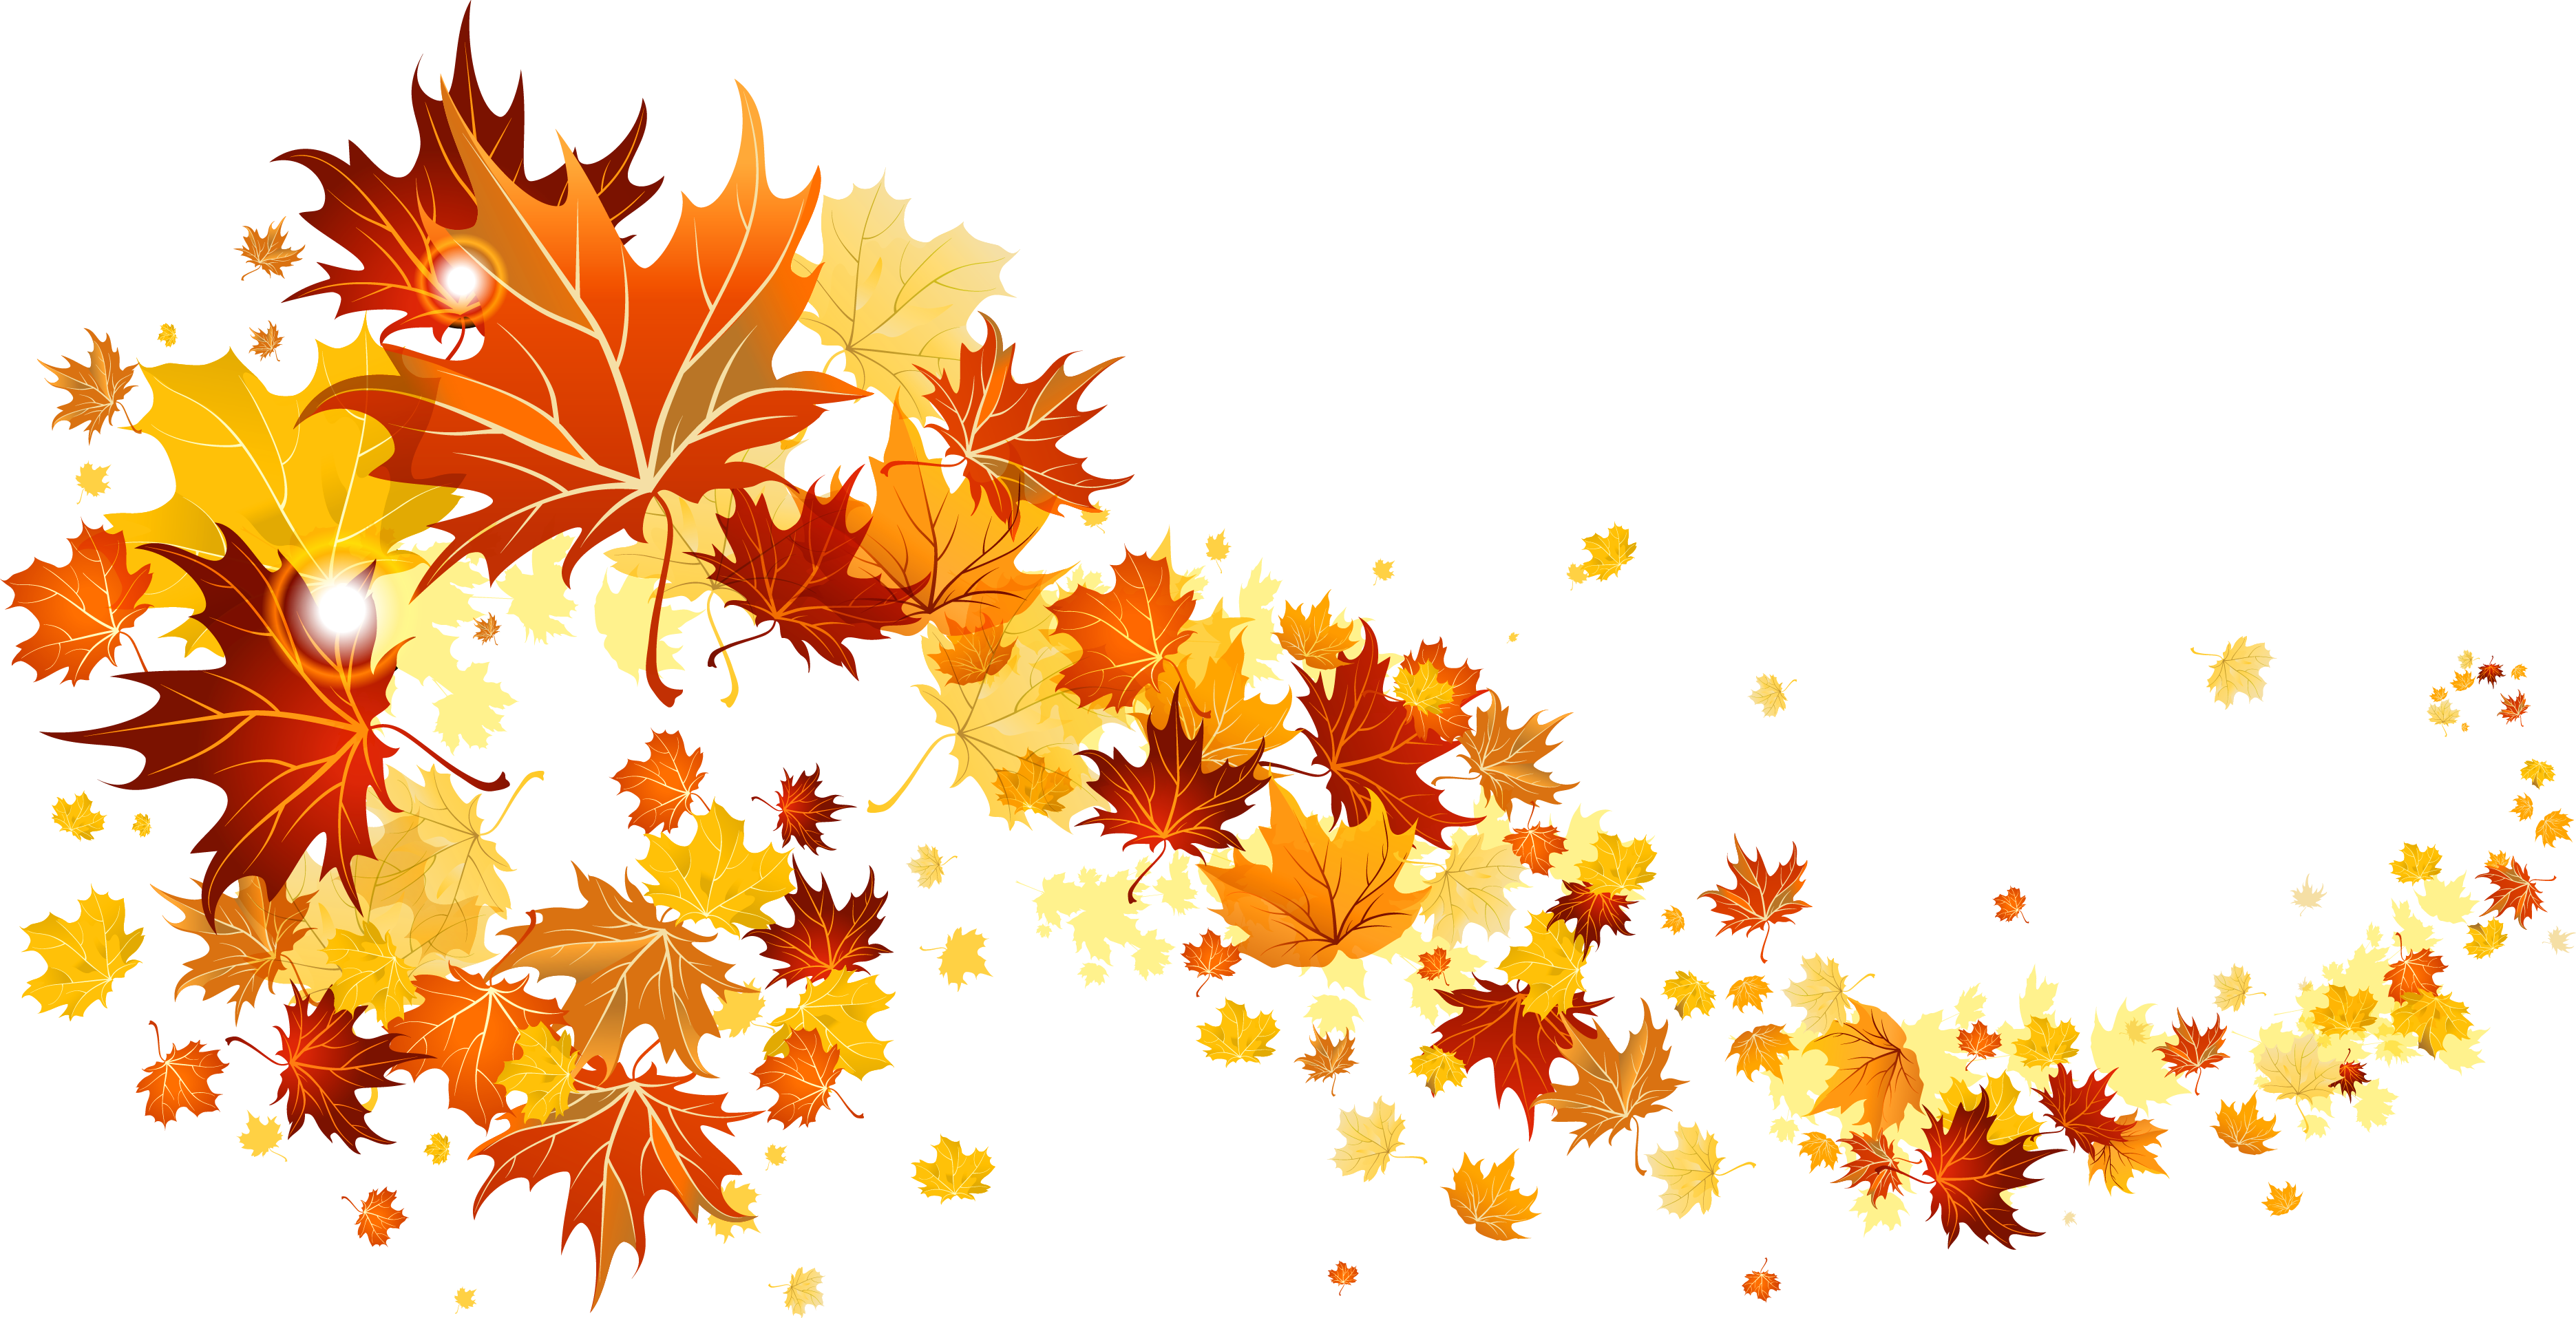 Falling leaves transparent png. Clipart fall group